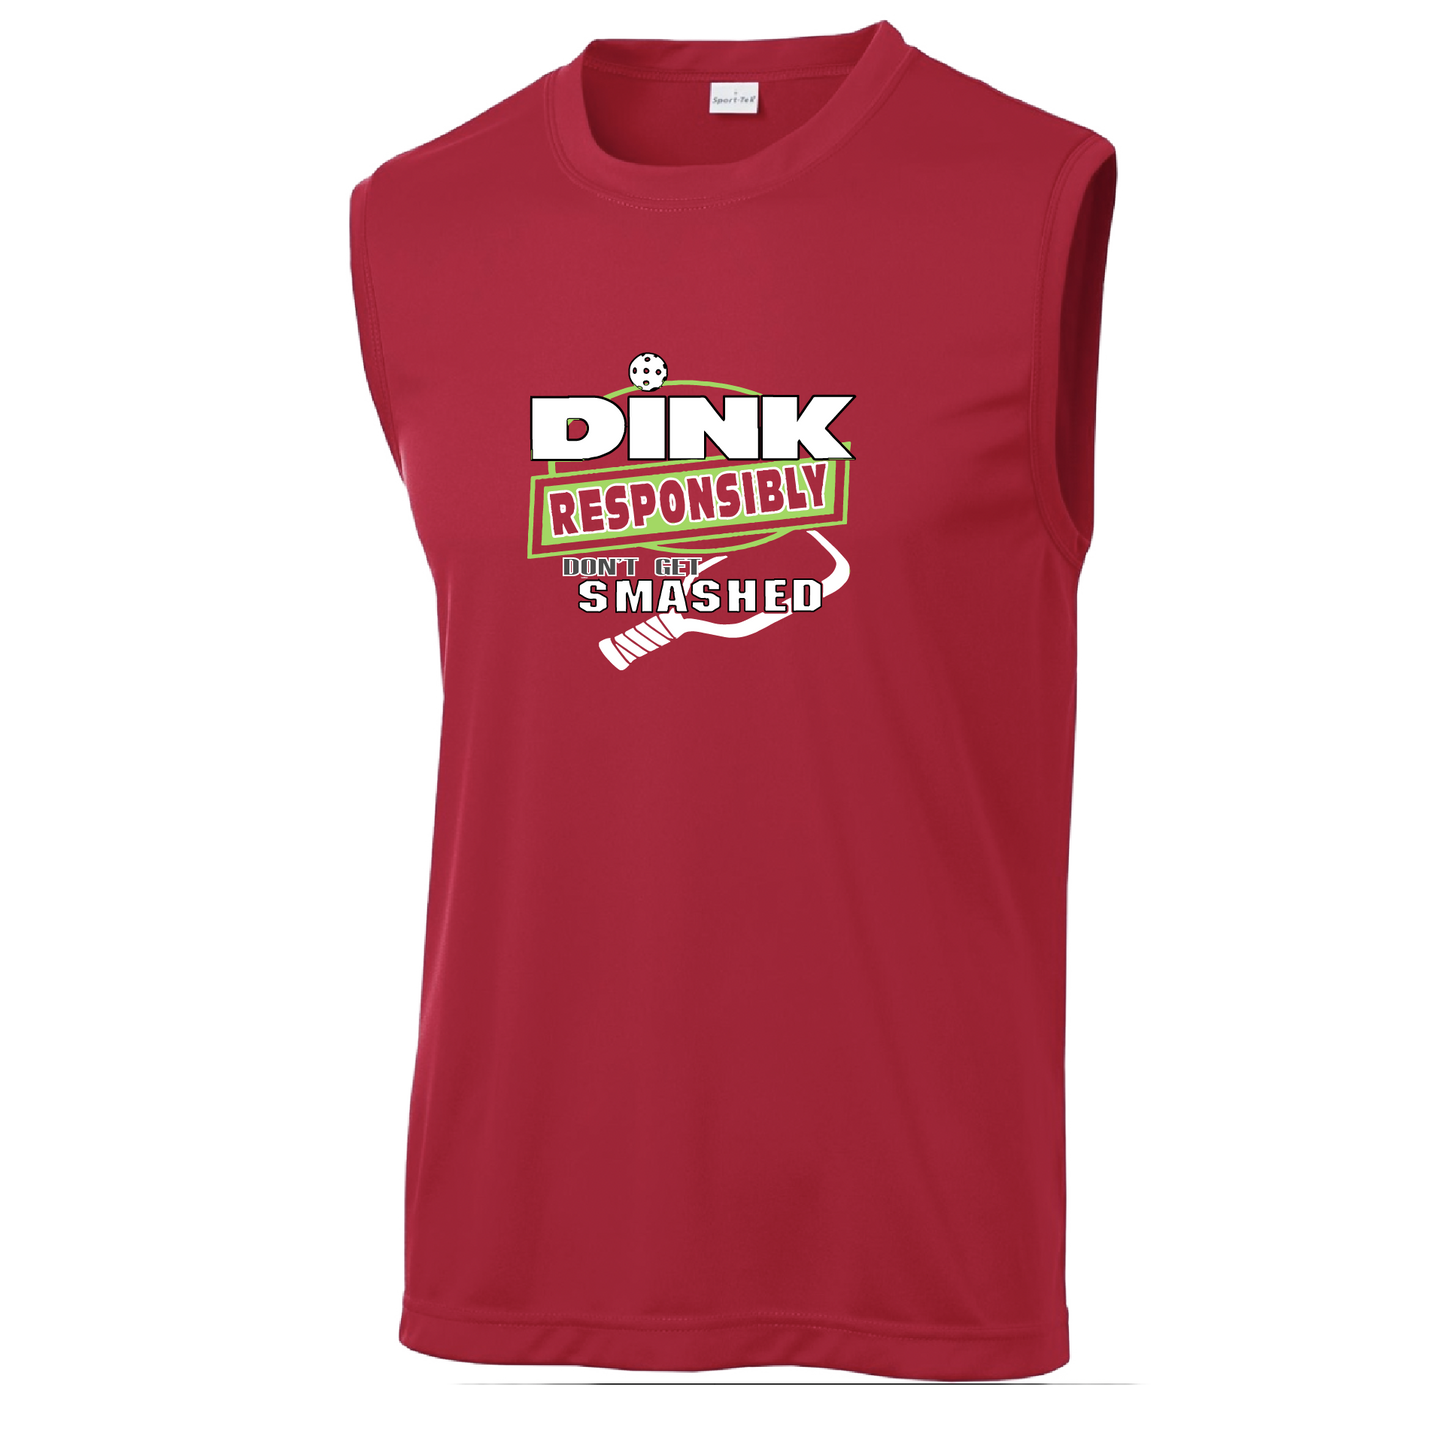 Pickleball Design: Dink Responsibly - Don't Get Smashed  Men's Styles: Sleeveless  Shirts are lightweight, roomy and highly breathable. These moisture-wicking shirts are designed for athletic performance. They feature PosiCharge technology to lock in color and prevent logos from fading. Removable tag and set-in sleeves for comfort.